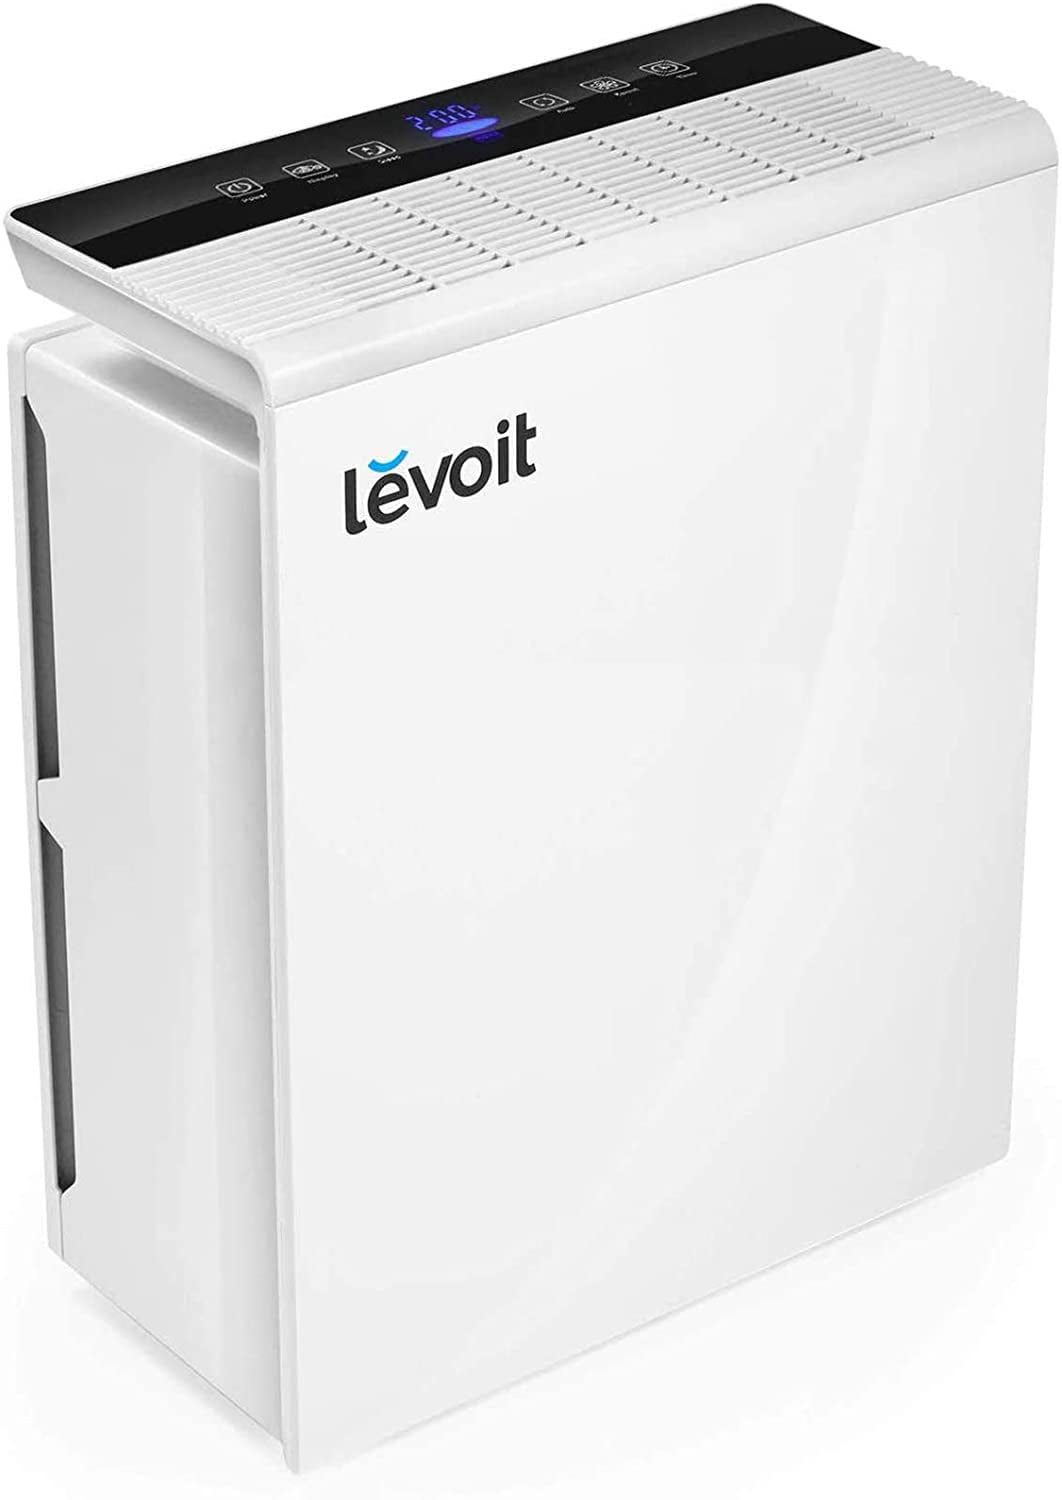  LEVOIT Air Purifiers for Home Large Room with HEPA Filter,  Cleaner for Allergies and Pets, Smokers, Mold, Pollen, Dust, Quiet Odor  Eliminators for Bedroom, Smart Auto Mode, LV-H135, White : Home